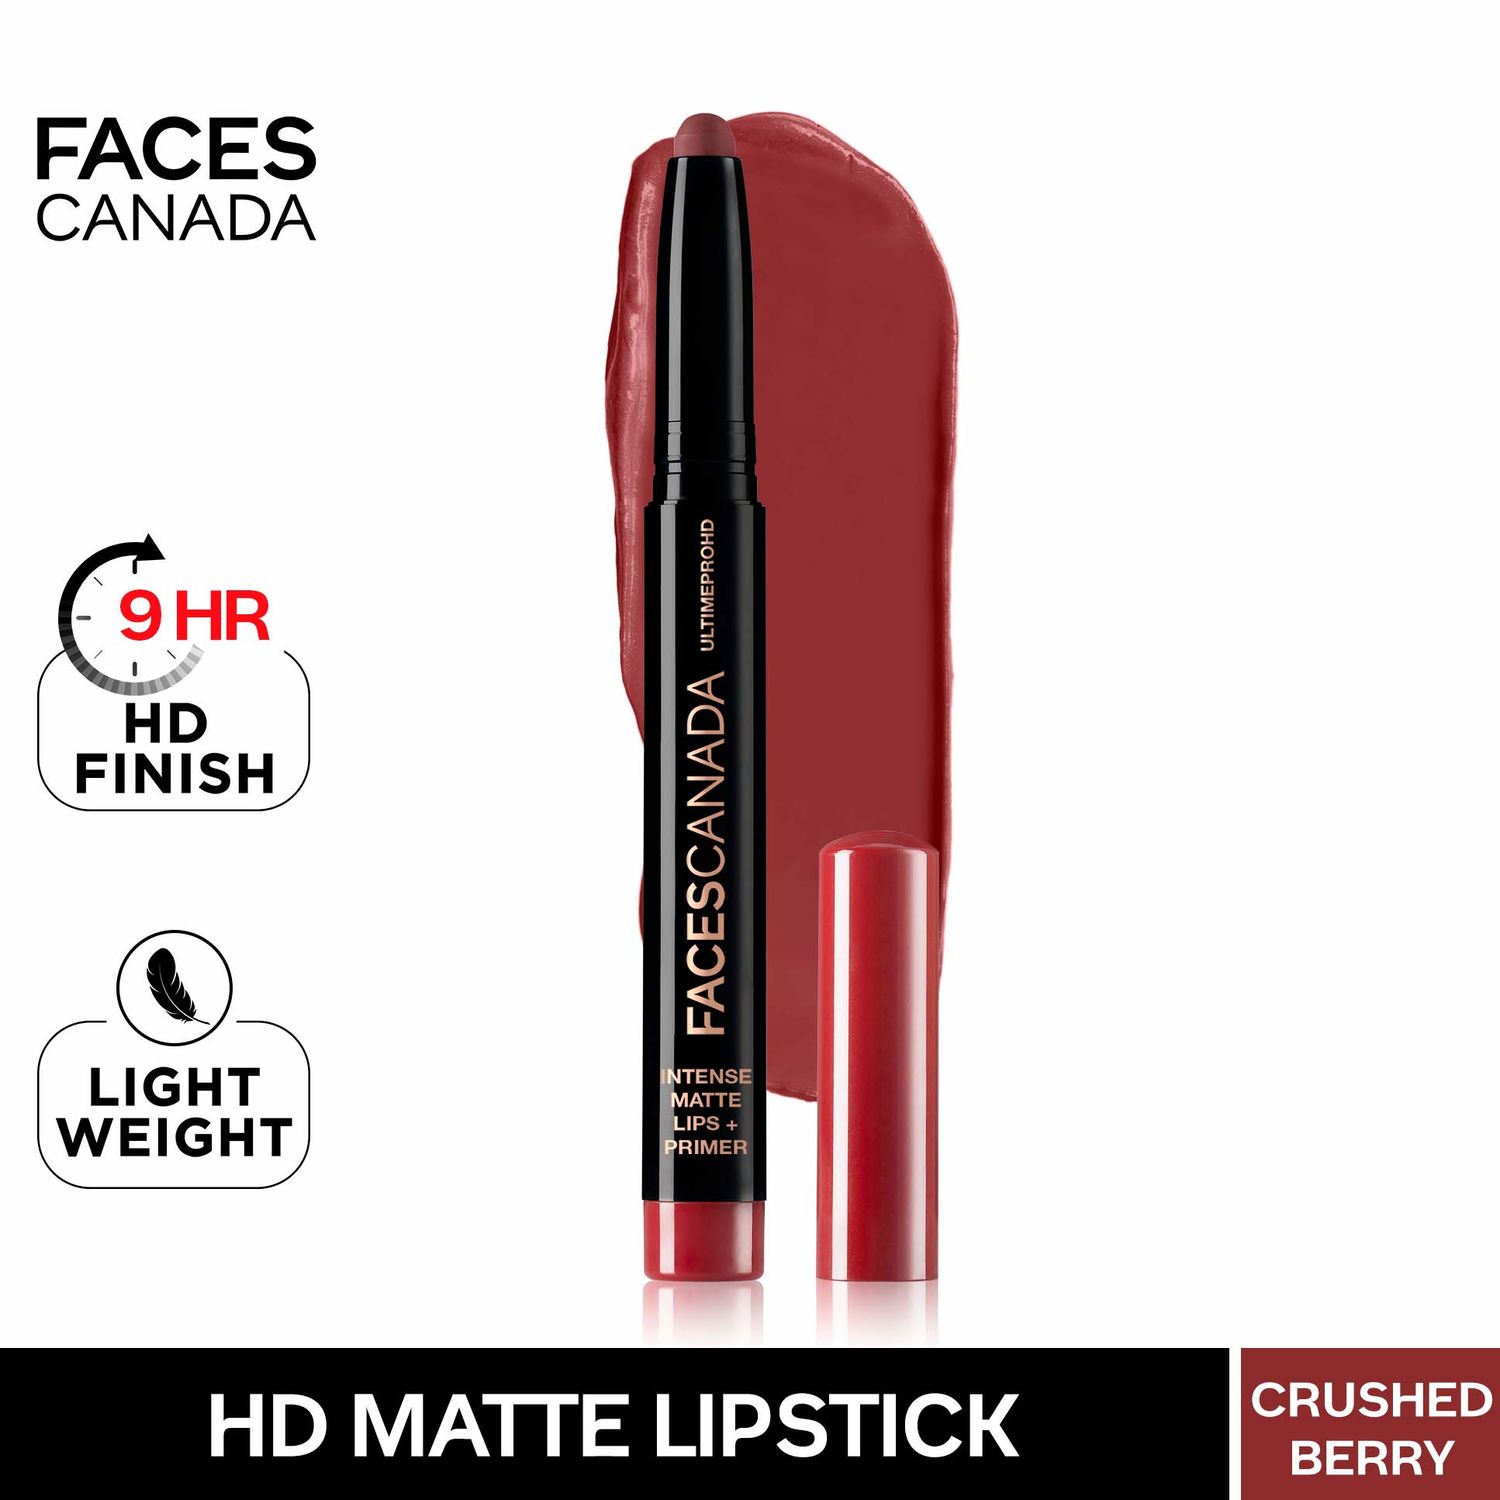 Faces Canada HD Intense Matte Lipstick | Featherlight comfort | 10 hrs stay| Primer infused | Flawless HD finish |Made in Germany | Crushed Berry 1.4g